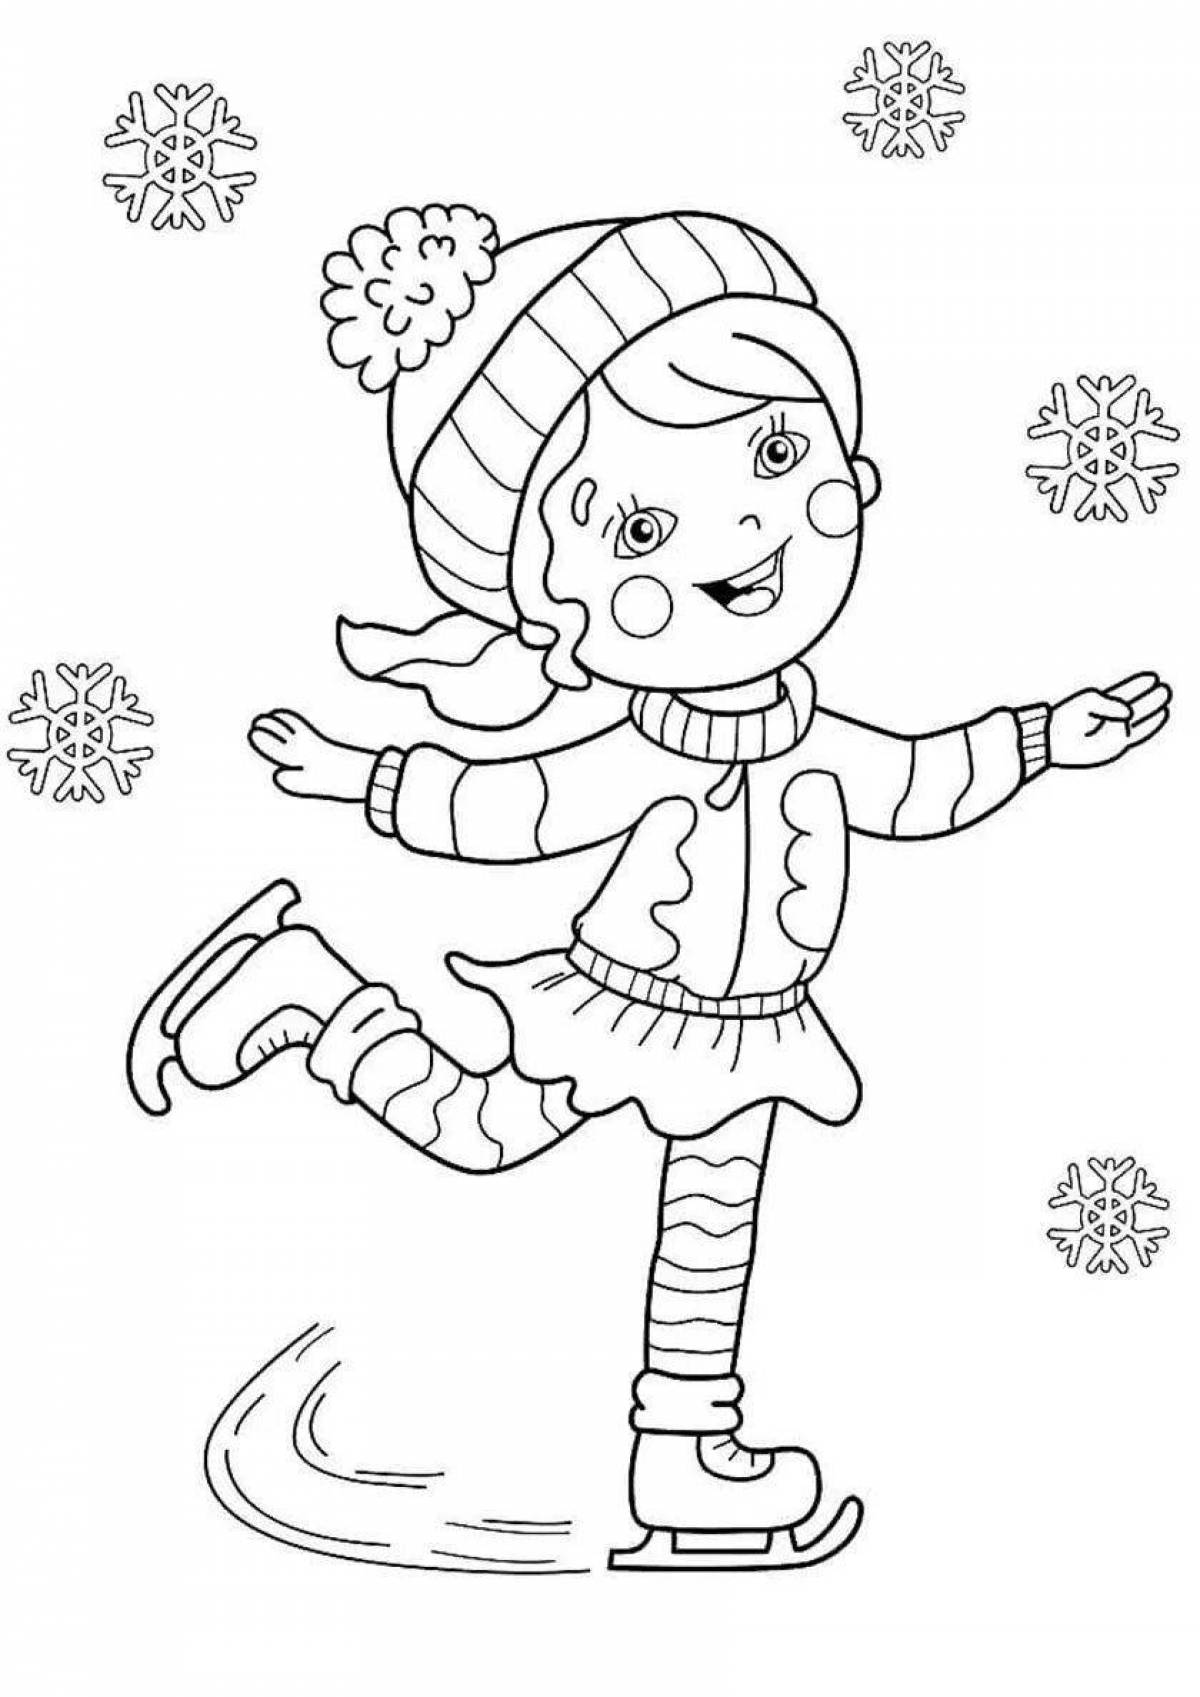 Inspirational winter sports coloring book